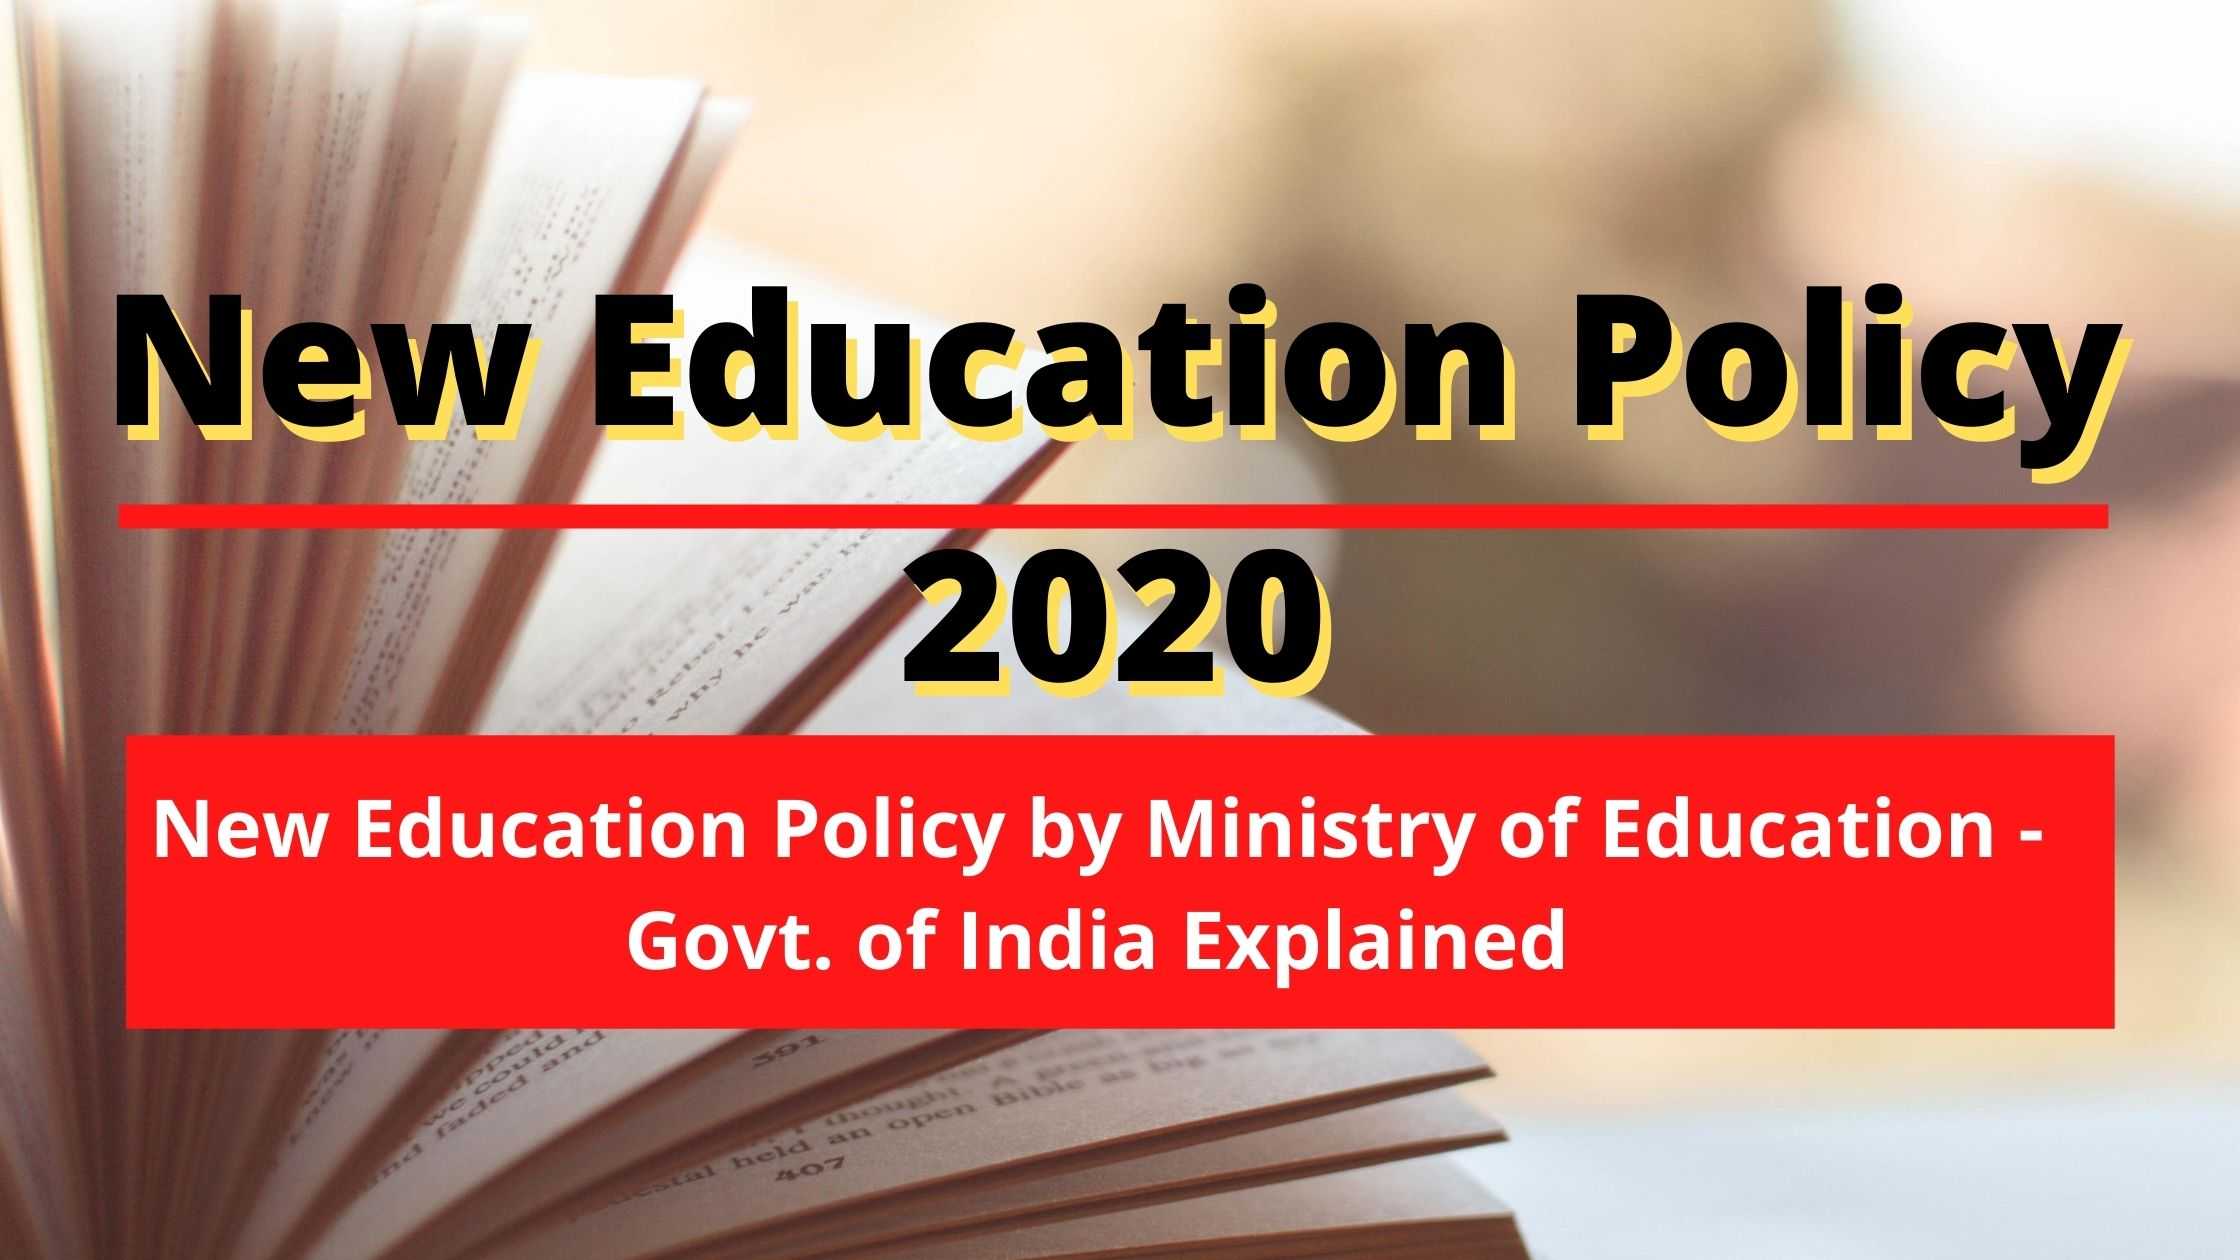 Frontlist | National Education Policy 2020: All you need to know